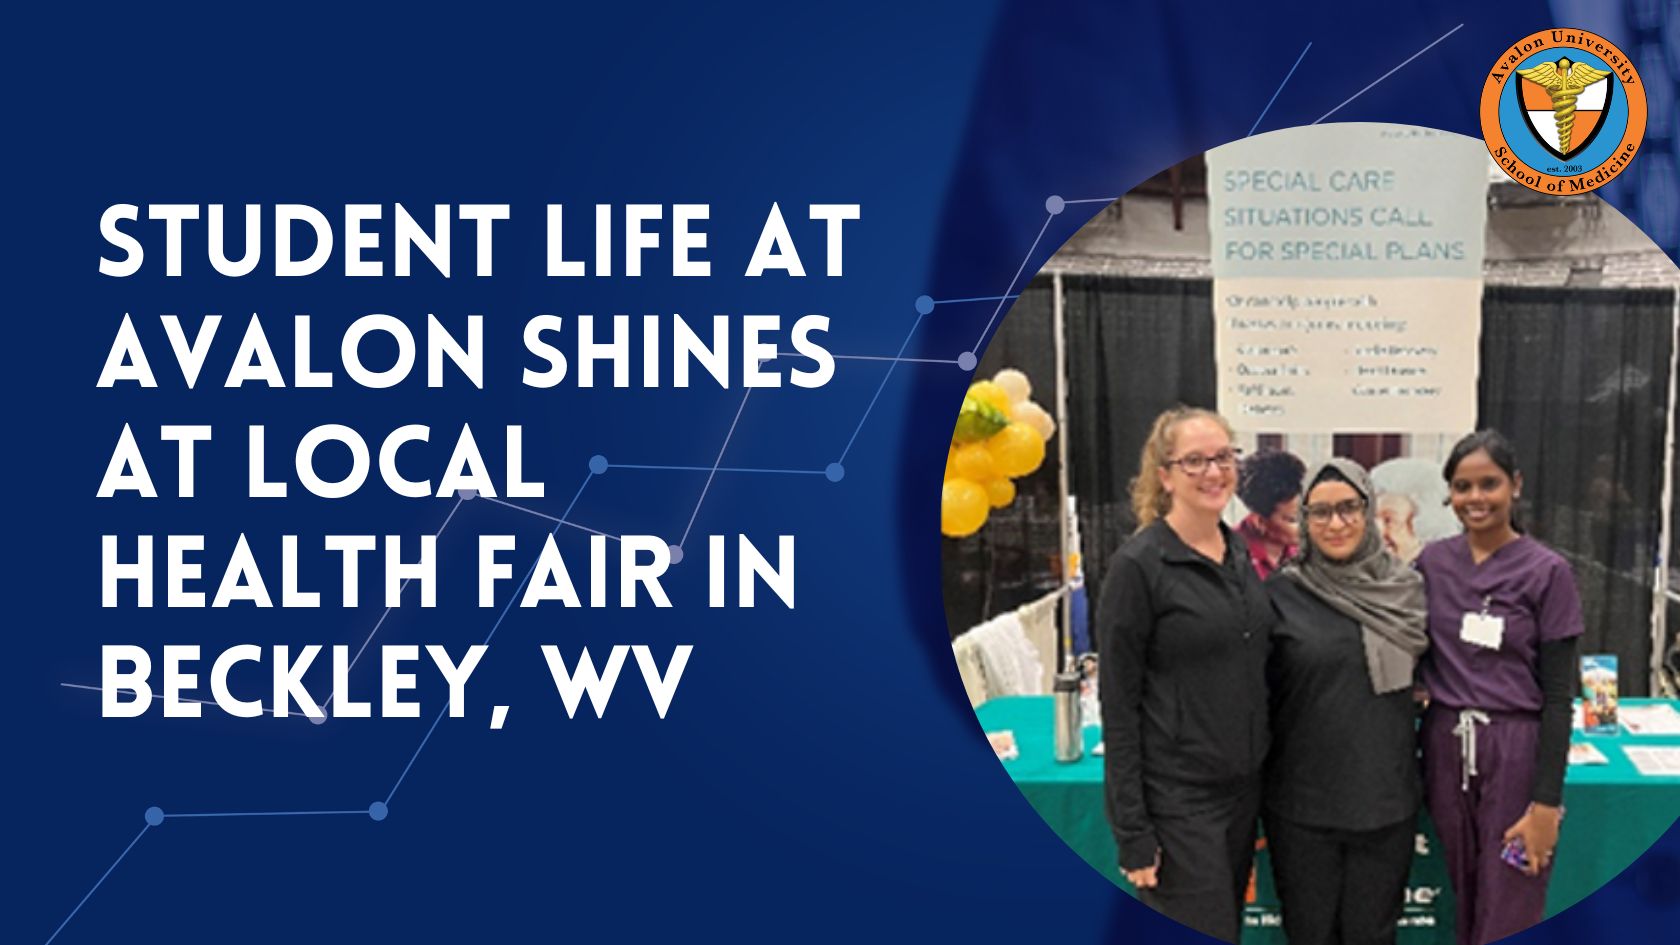 Student Life at Avalon Shines at Local Health Fair in Beckley, WV